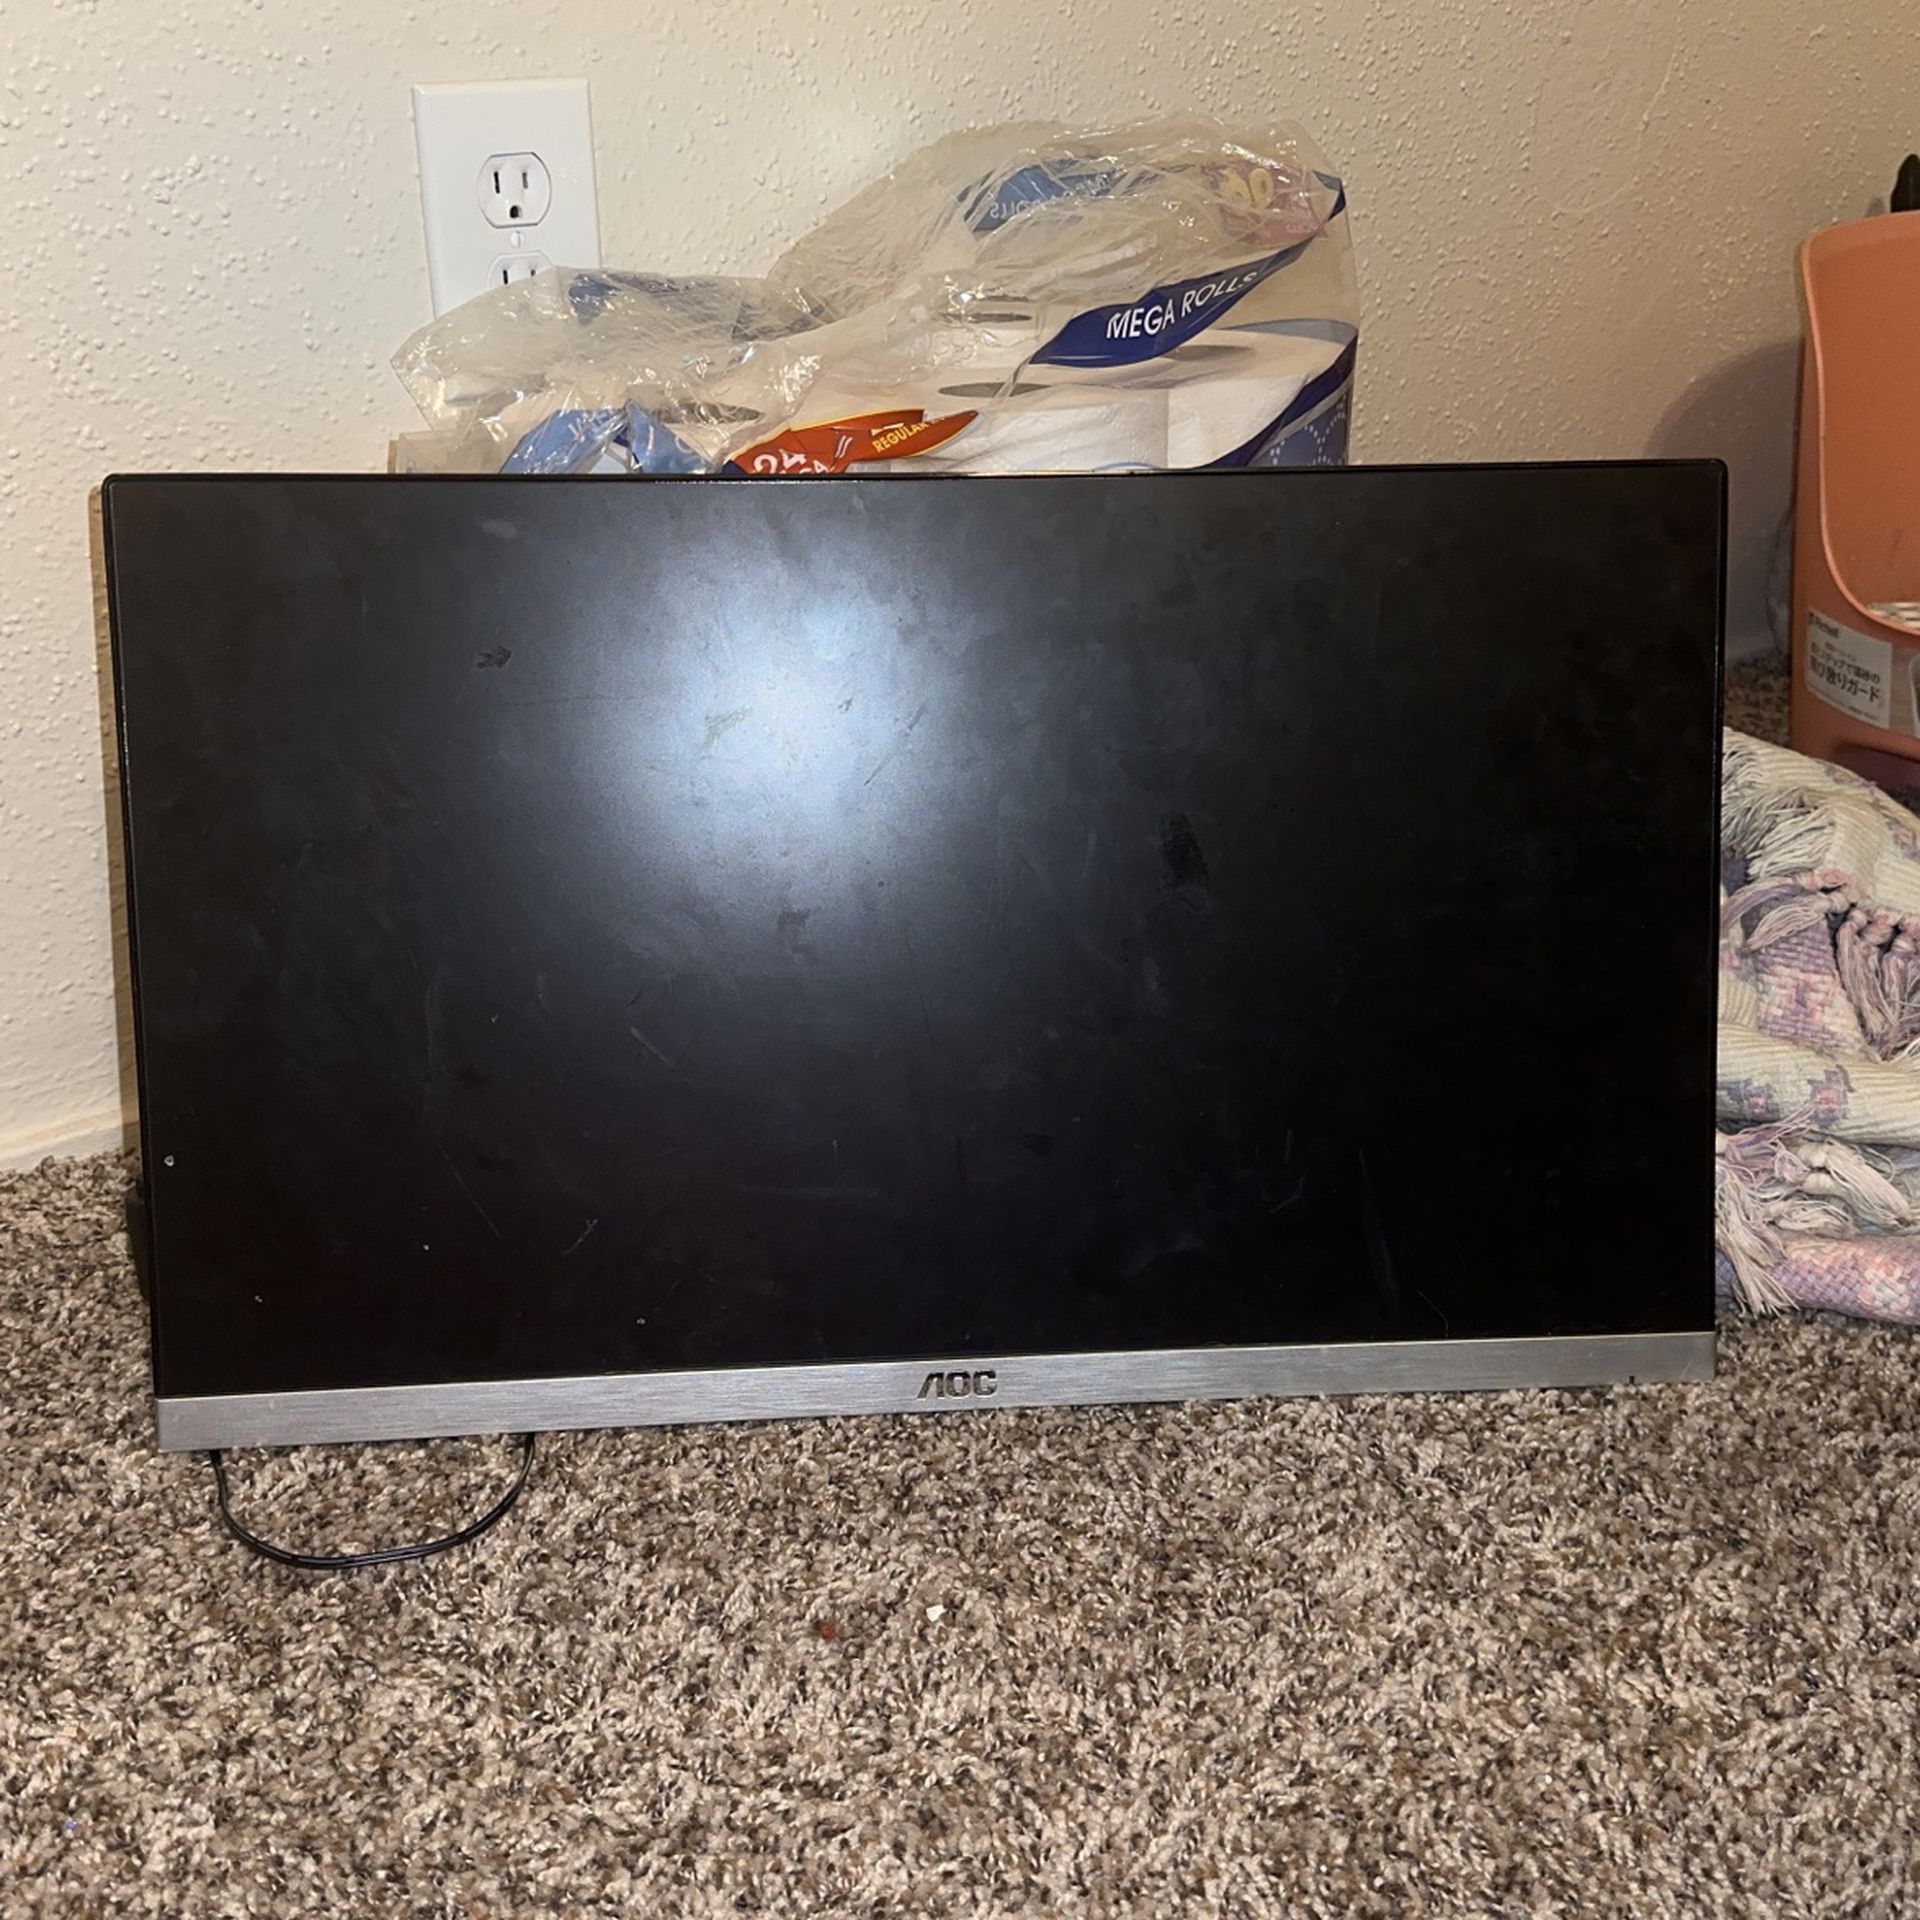 galón Janice Genealogía 23 inch LED monitor, AOC I2367F, Full HD (1080p) 230lm00023 for Sale in  College Station, TX - OfferUp